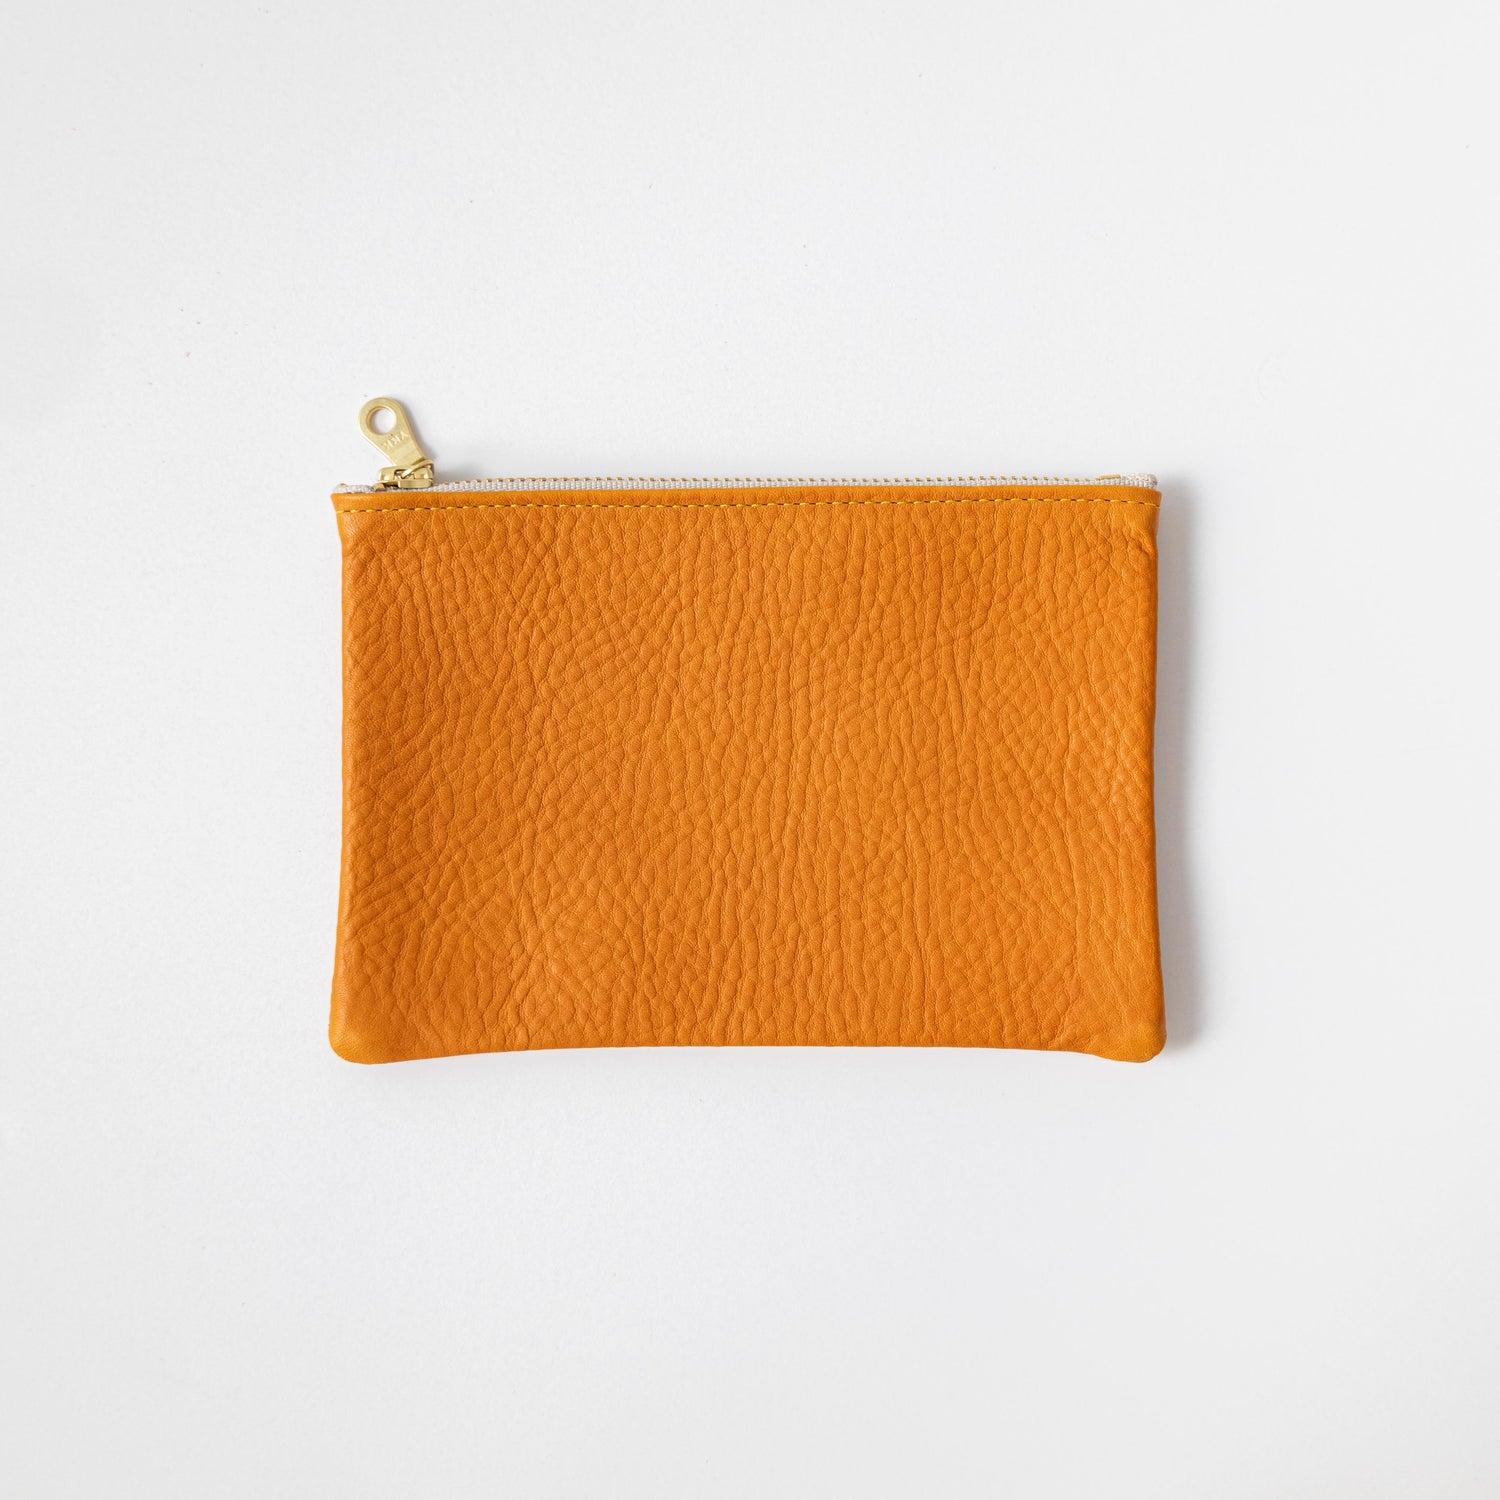 Women's coin purse in leather color cypress